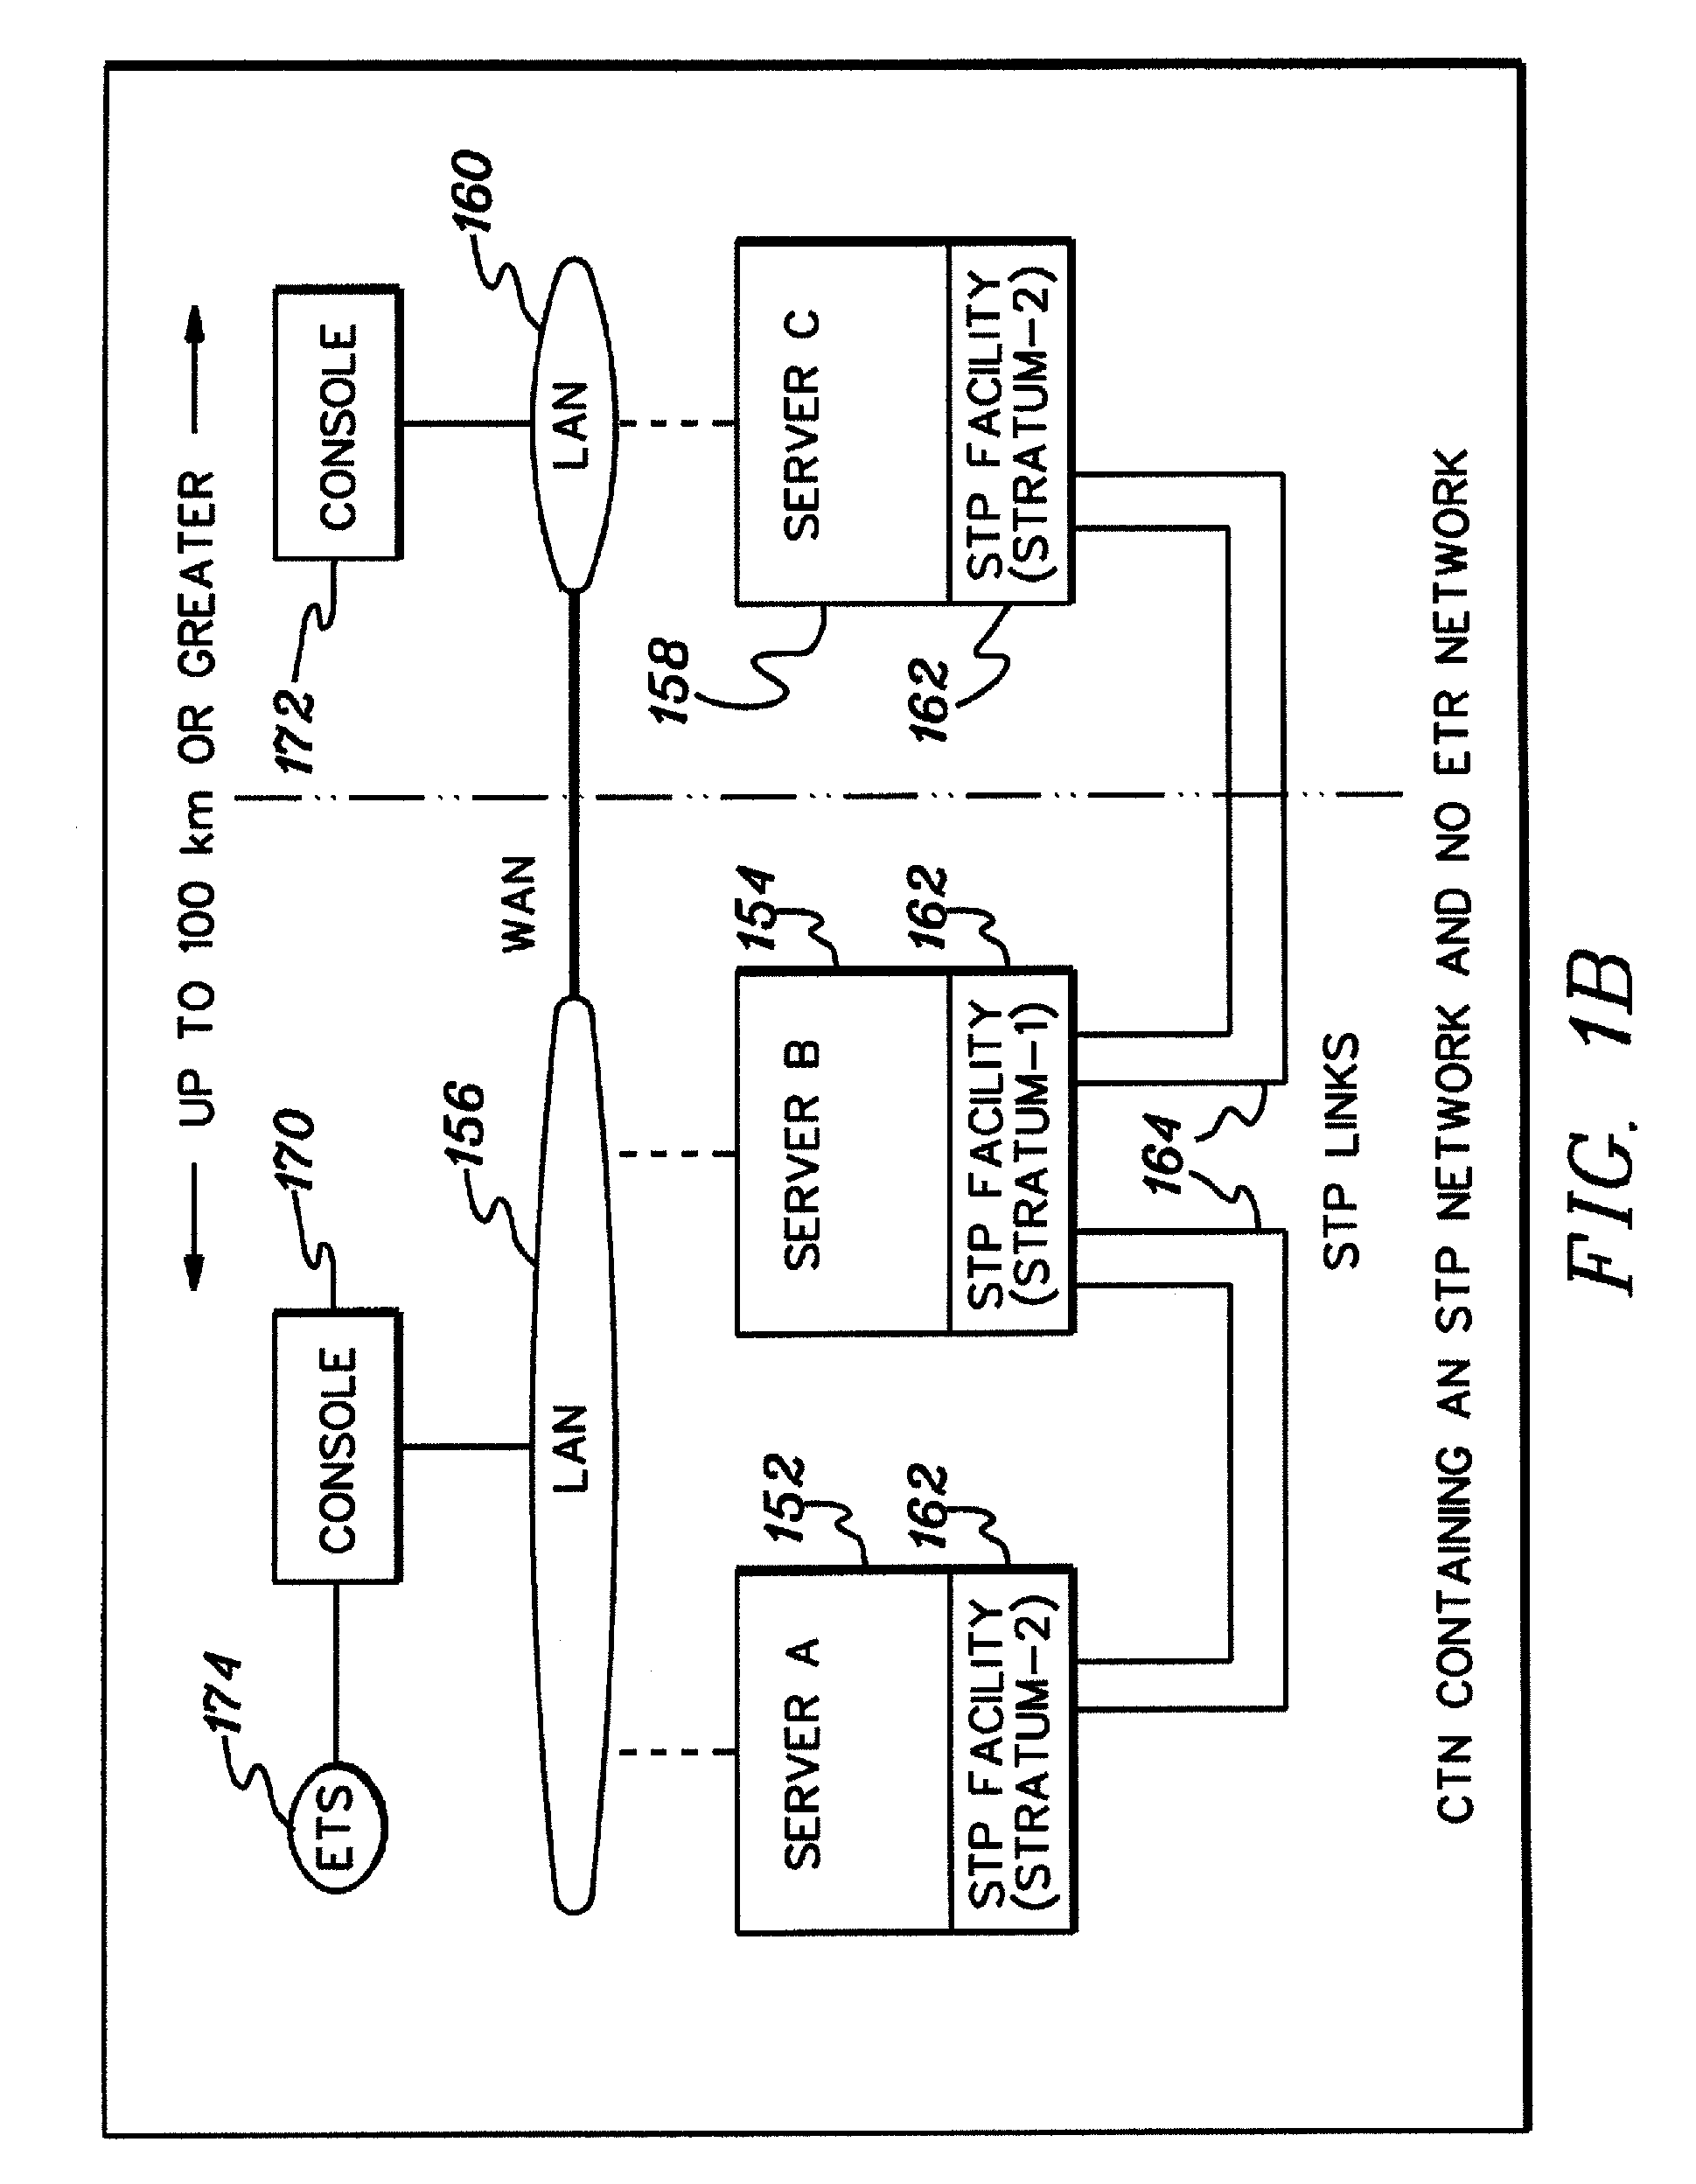 Server time protocol control messages and methods